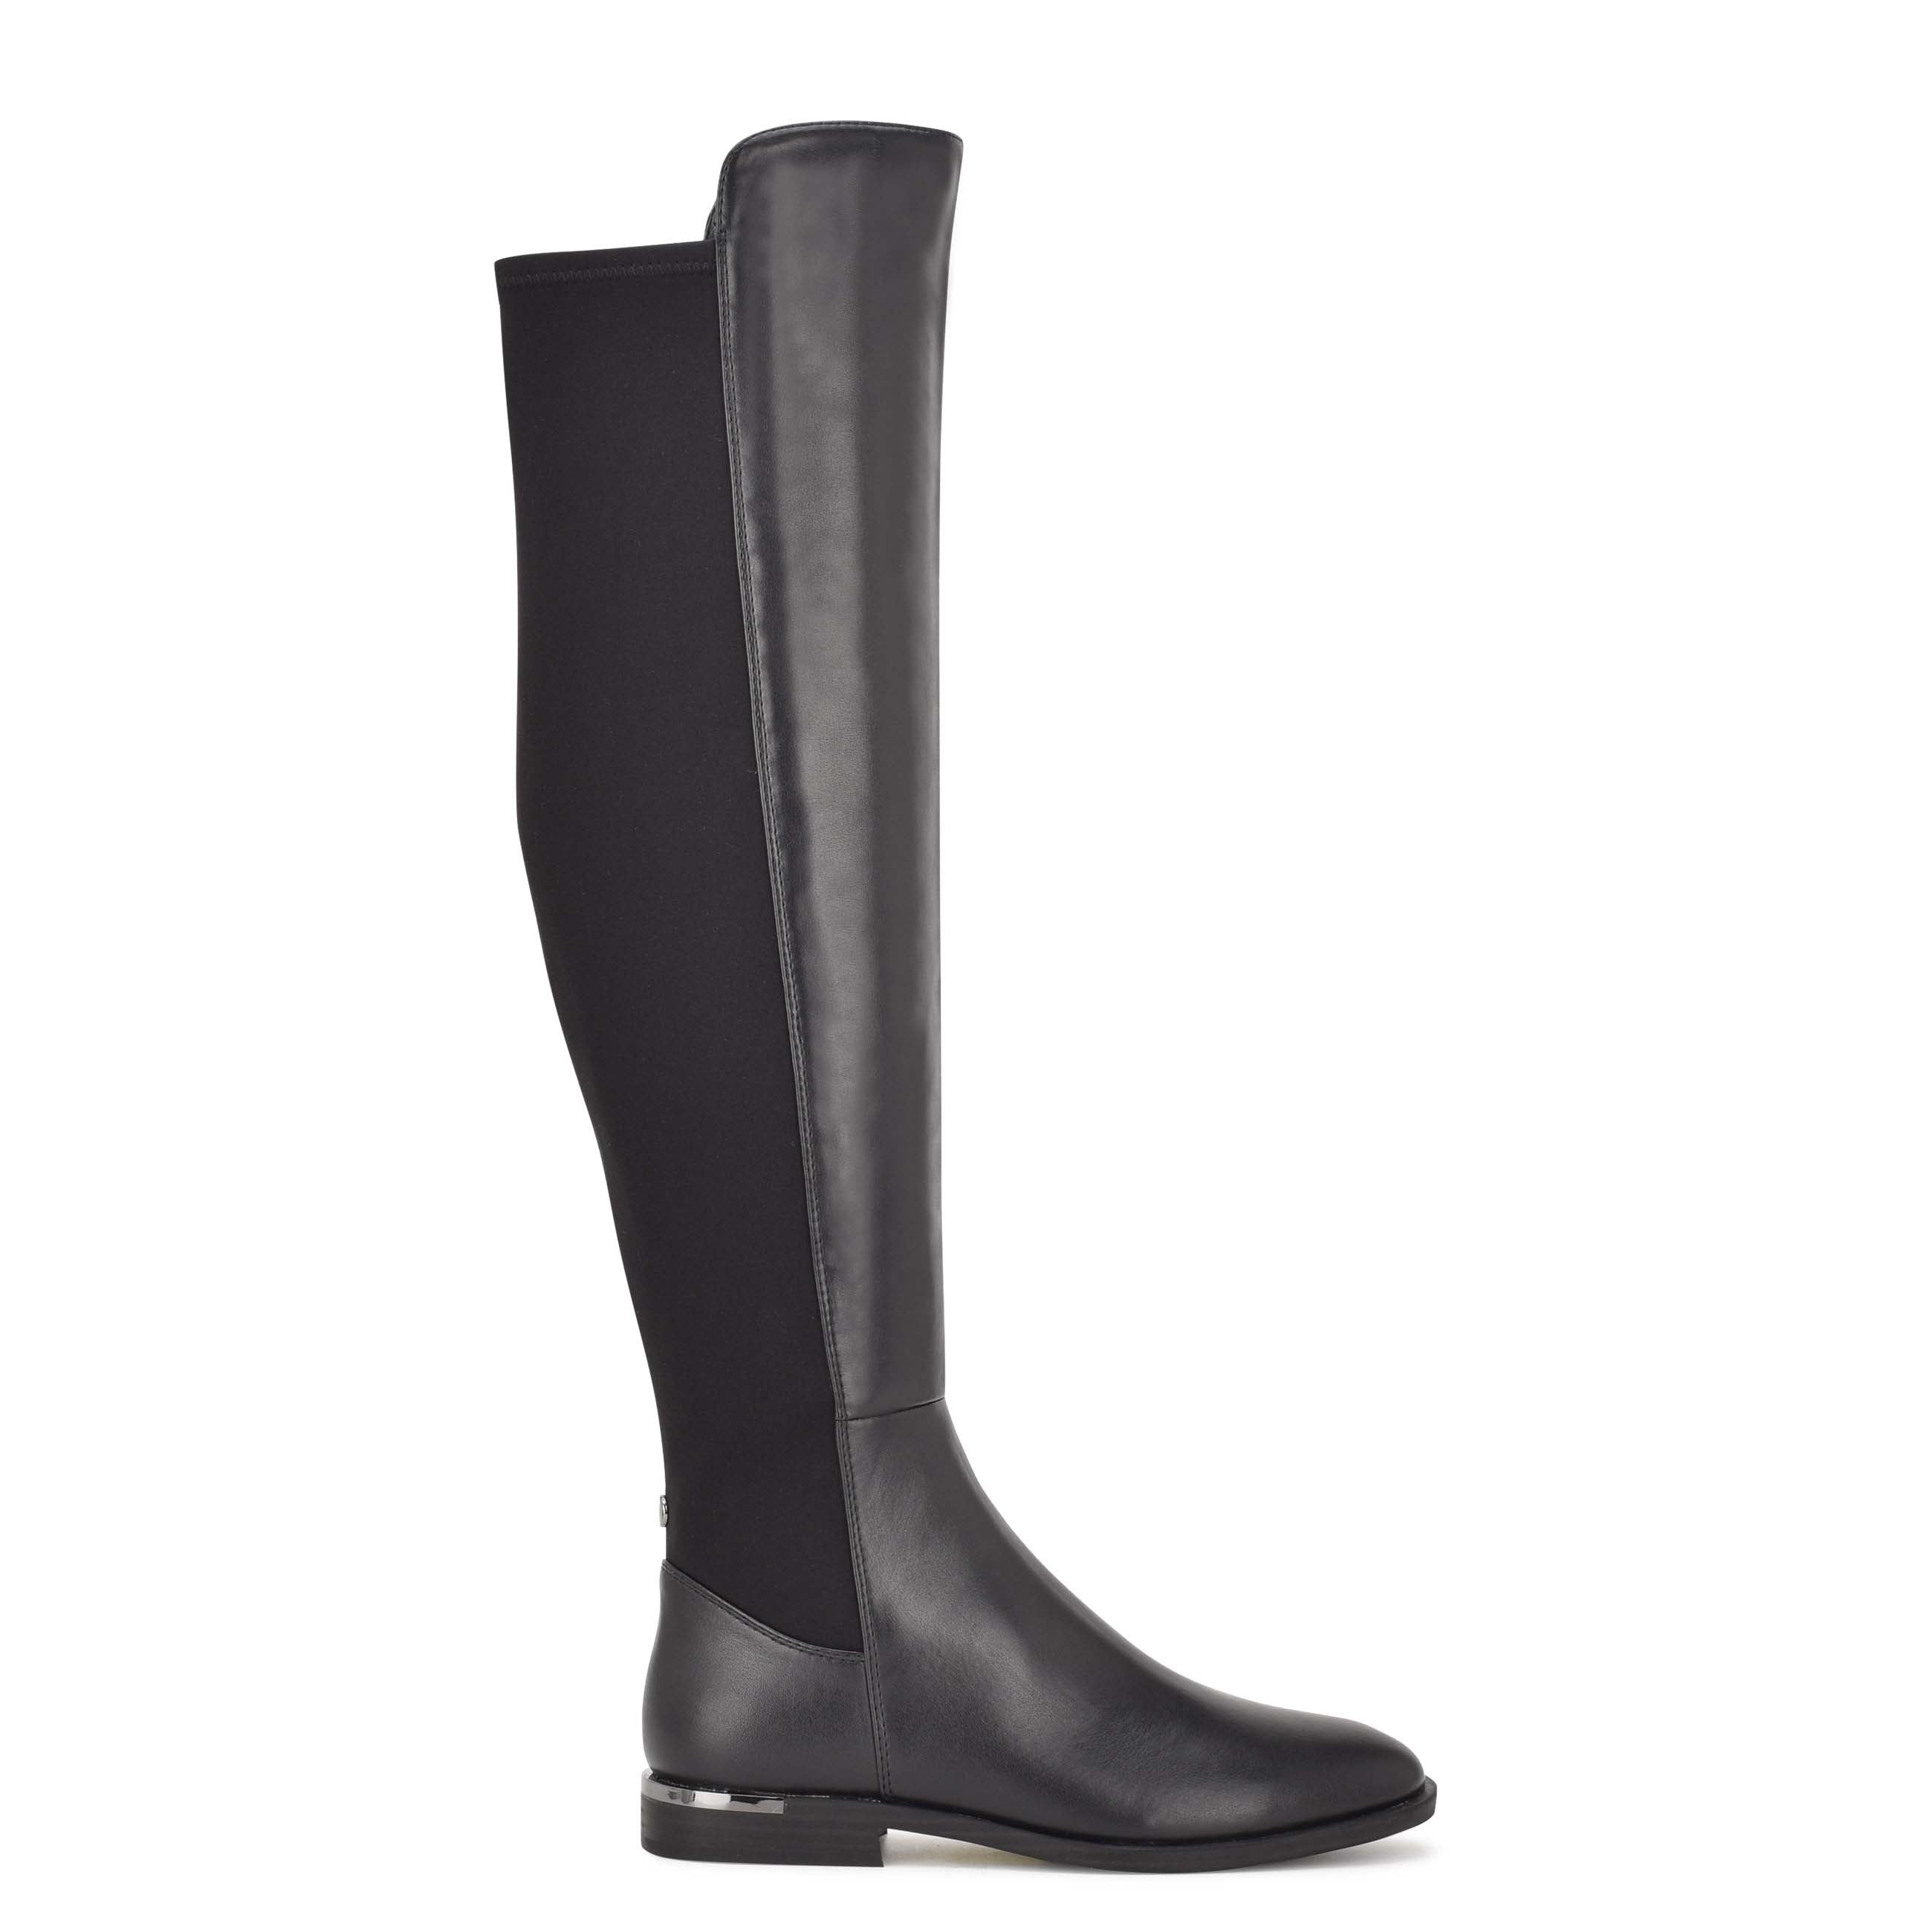 Allair Stretch Back Over the Knee Boots – Nine West